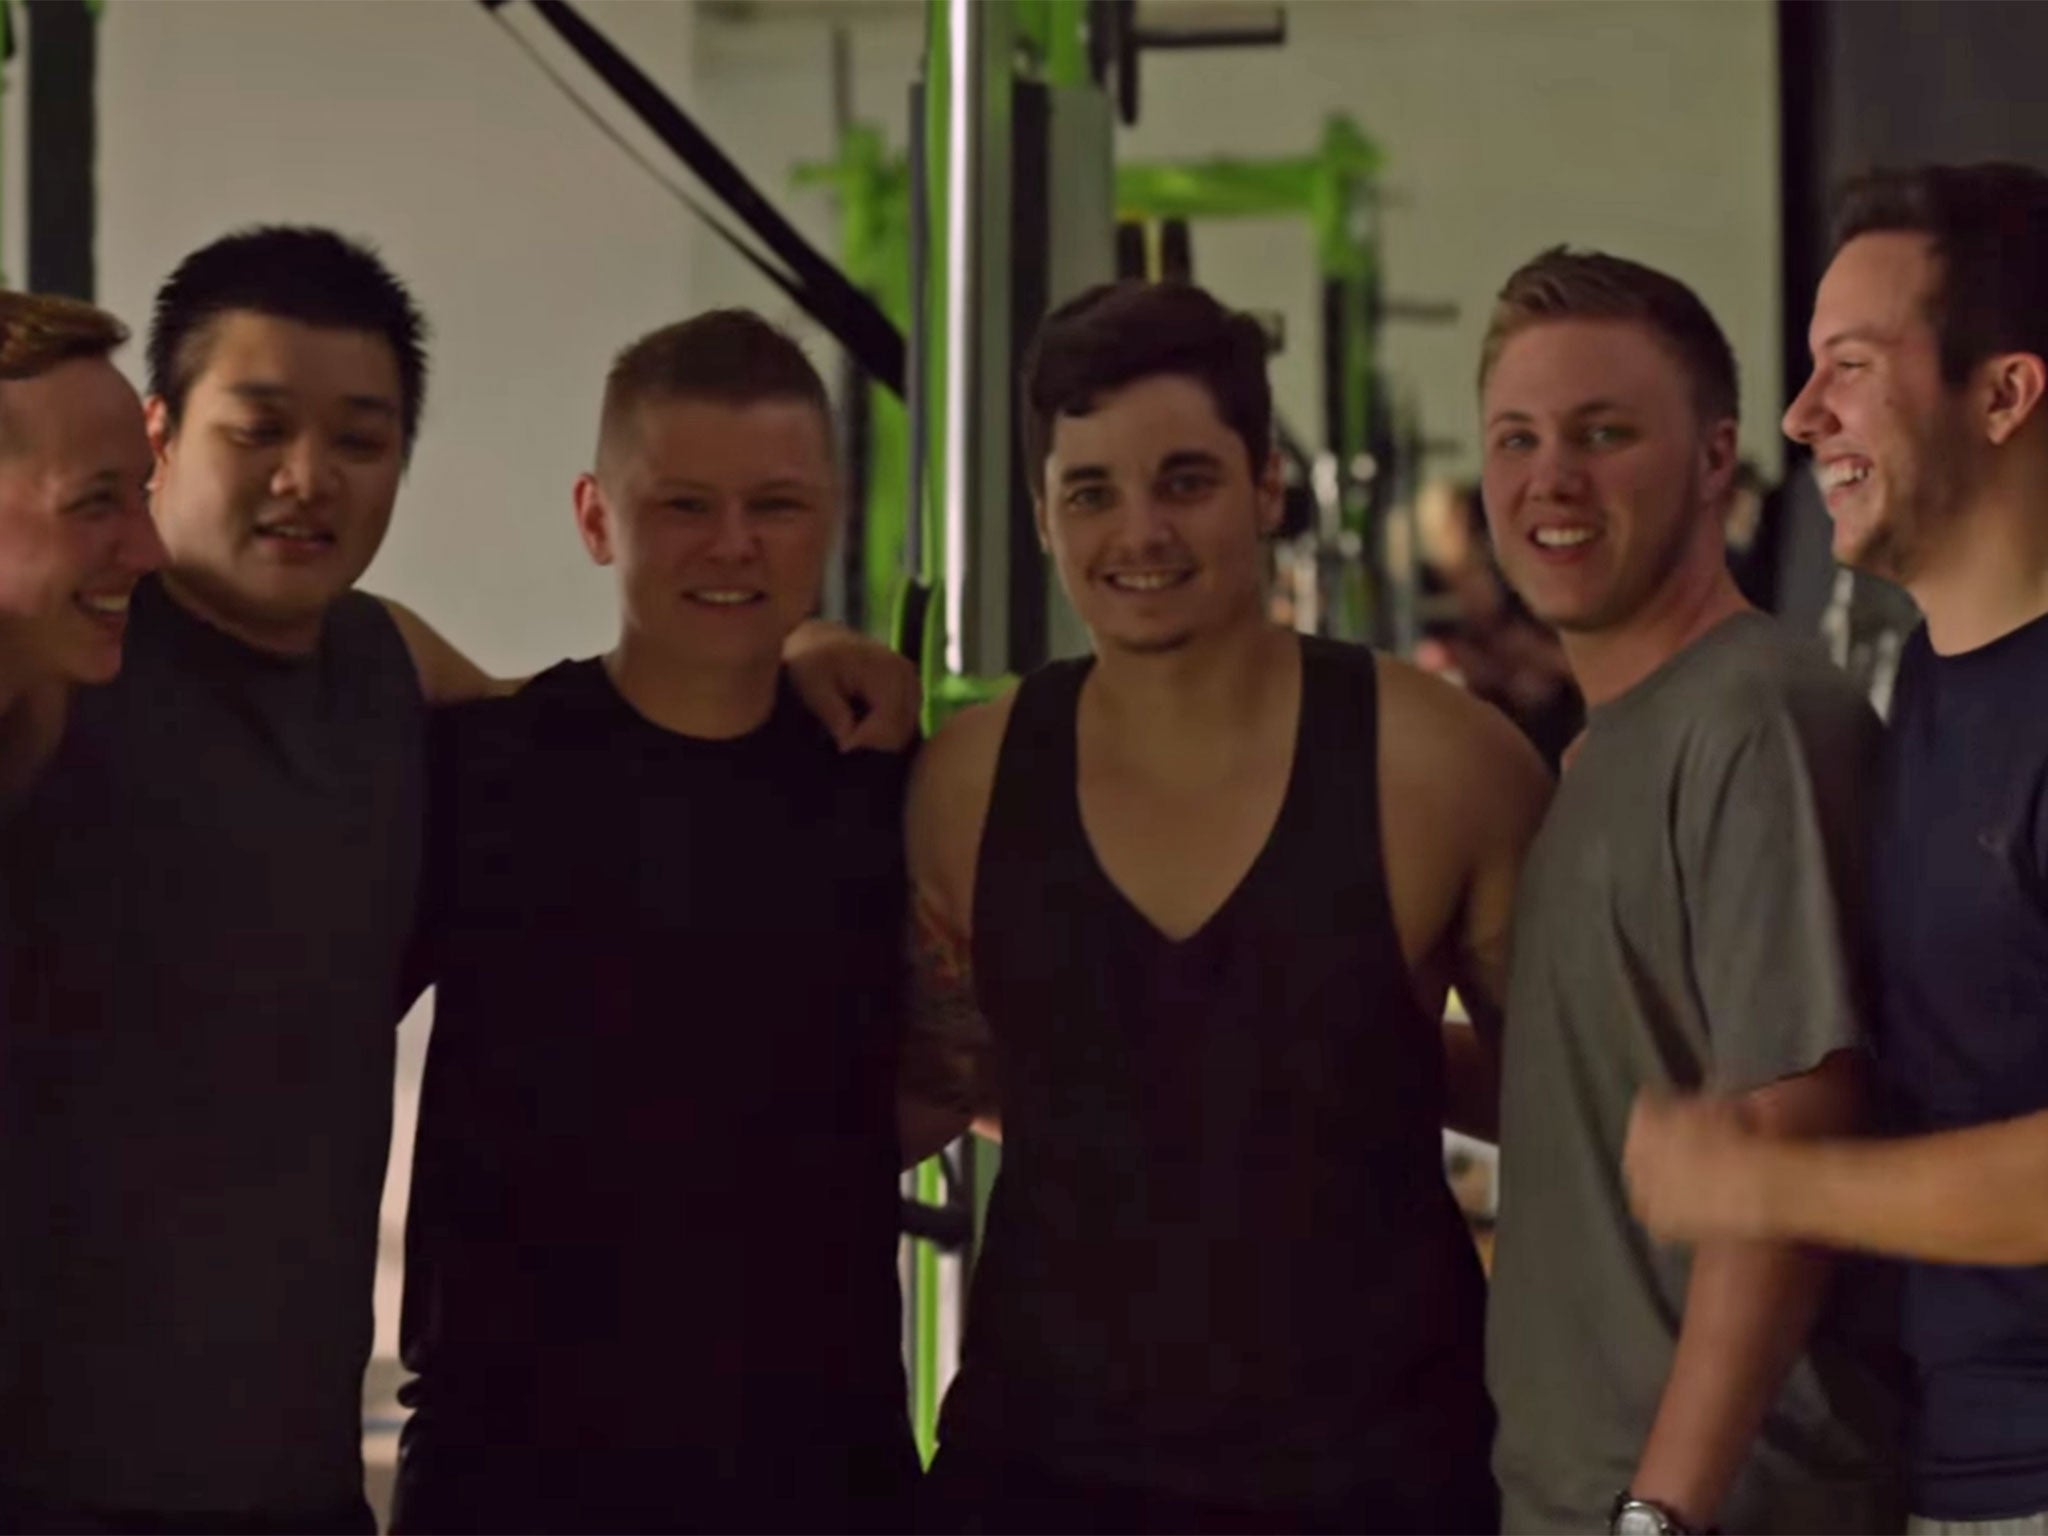 Google has released an advert featuring an inclusive gym